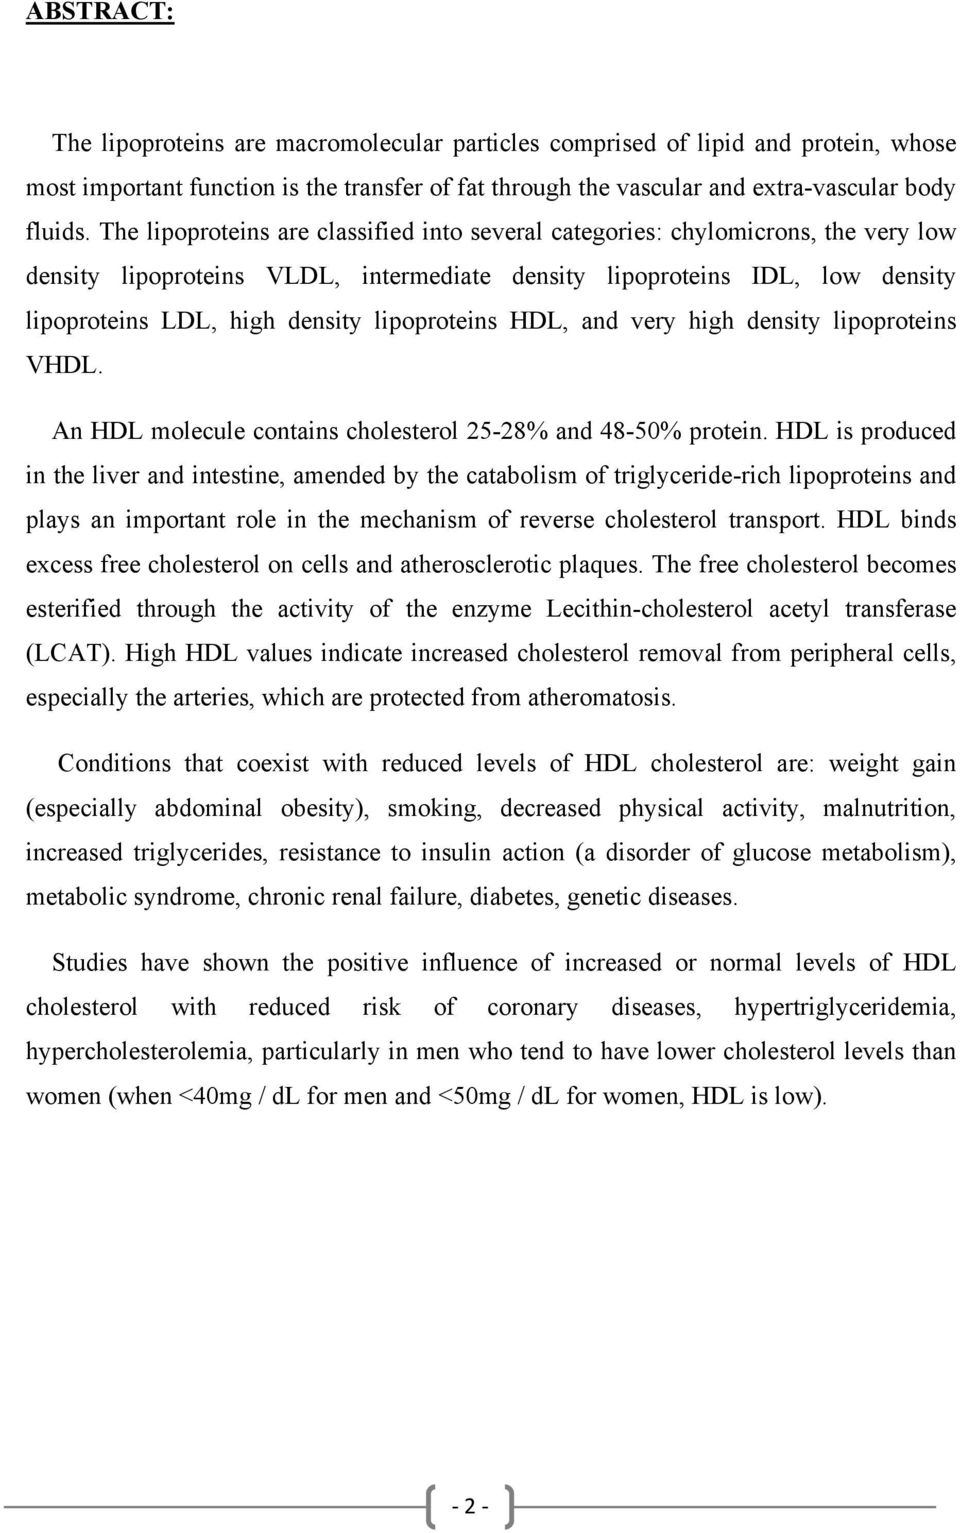 lipoproteins HDL, and very high density lipoproteins VHDL. An HDL molecule contains cholesterol 25-28% and 48-50% protein.